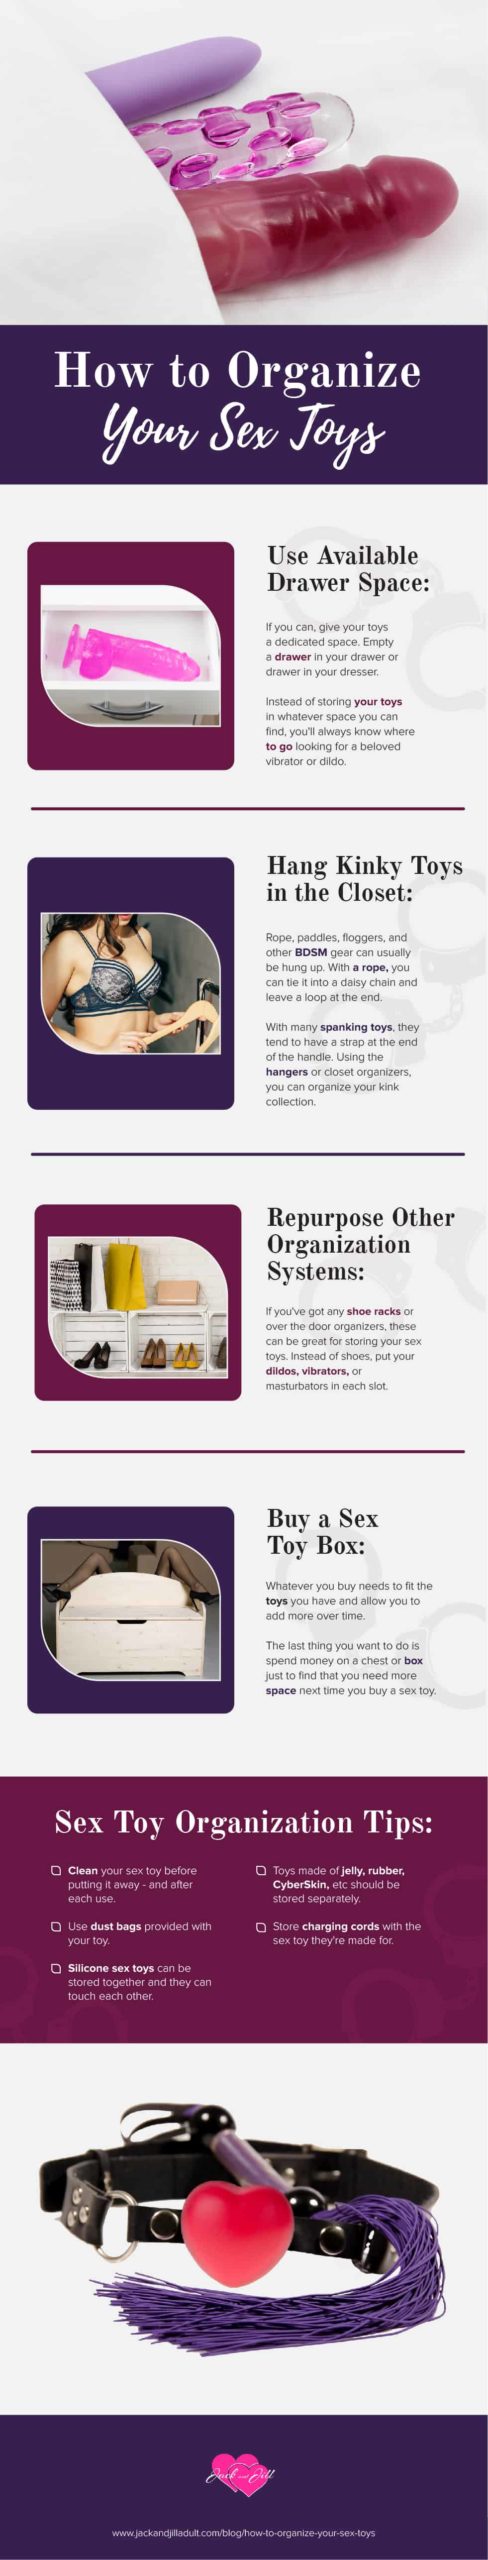 Infographic for How to Organize Your Sex Toys